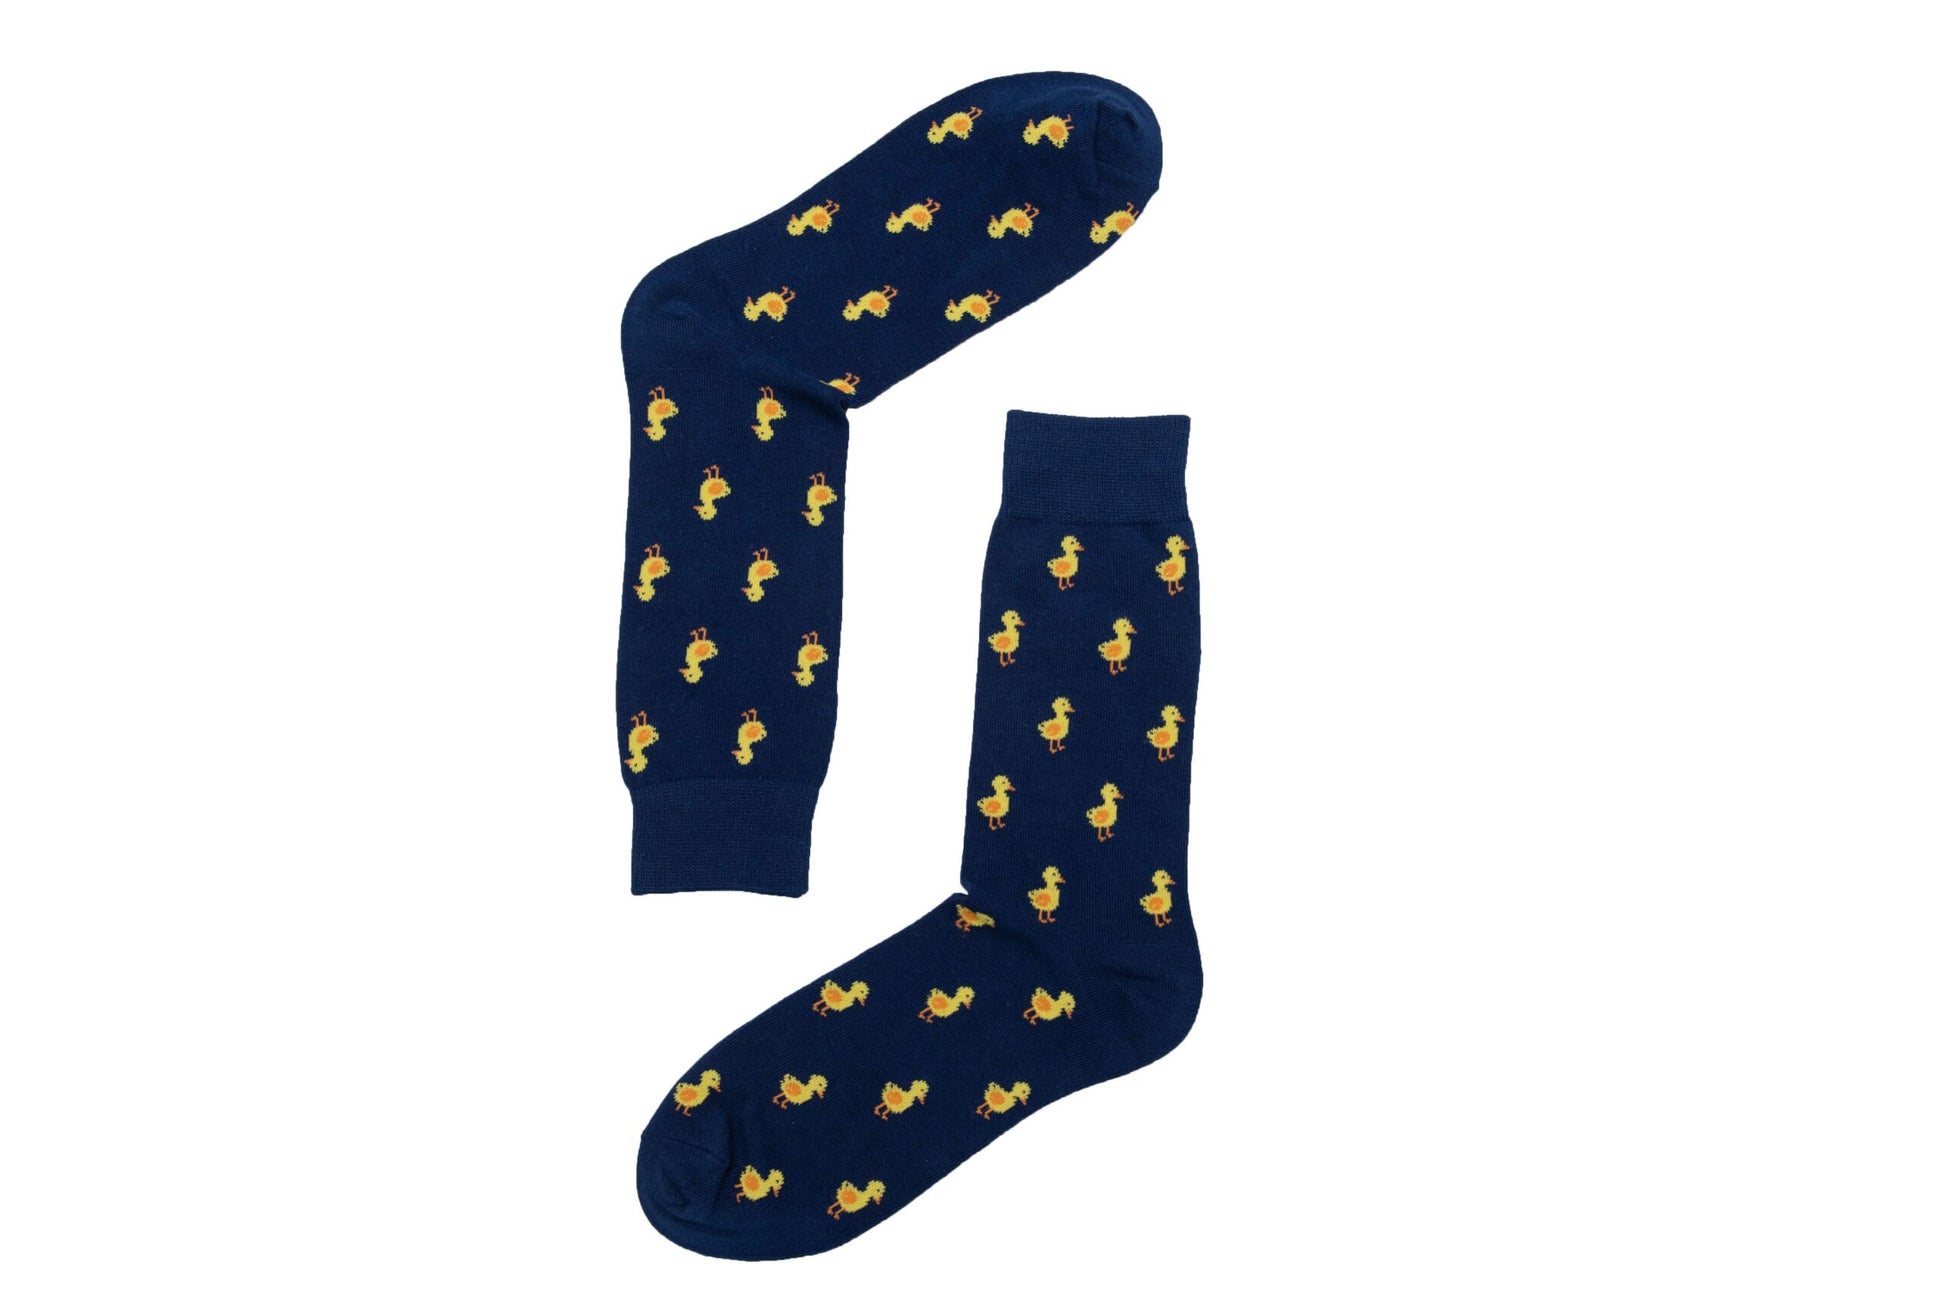 A pair of Duck Socks with yellow flamingos on them.